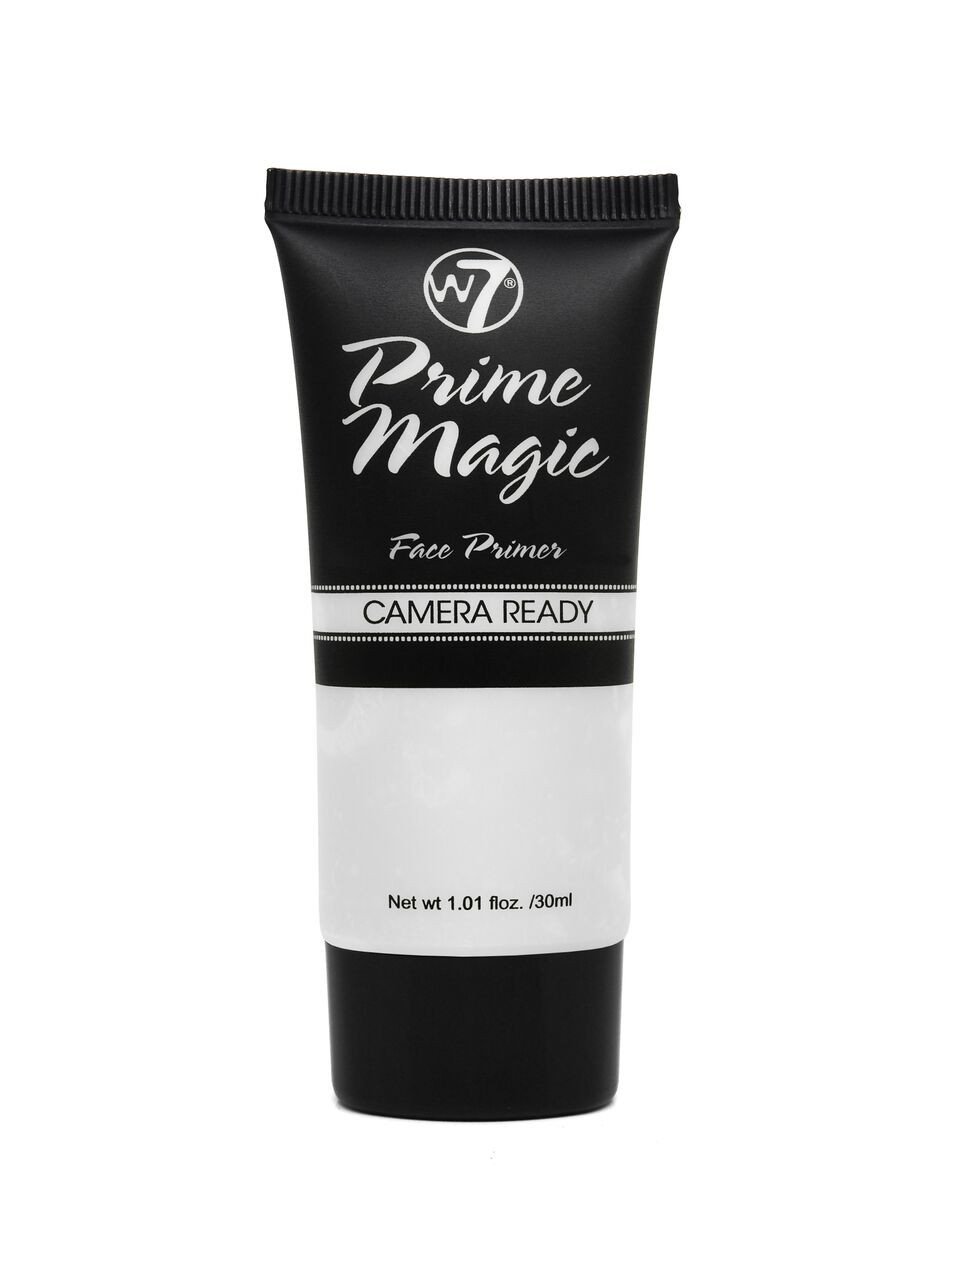 Buy W7 Prime Magic Clear Face Primer, 30ml | cosmeticsdiarypk 100% Original Beauty Products